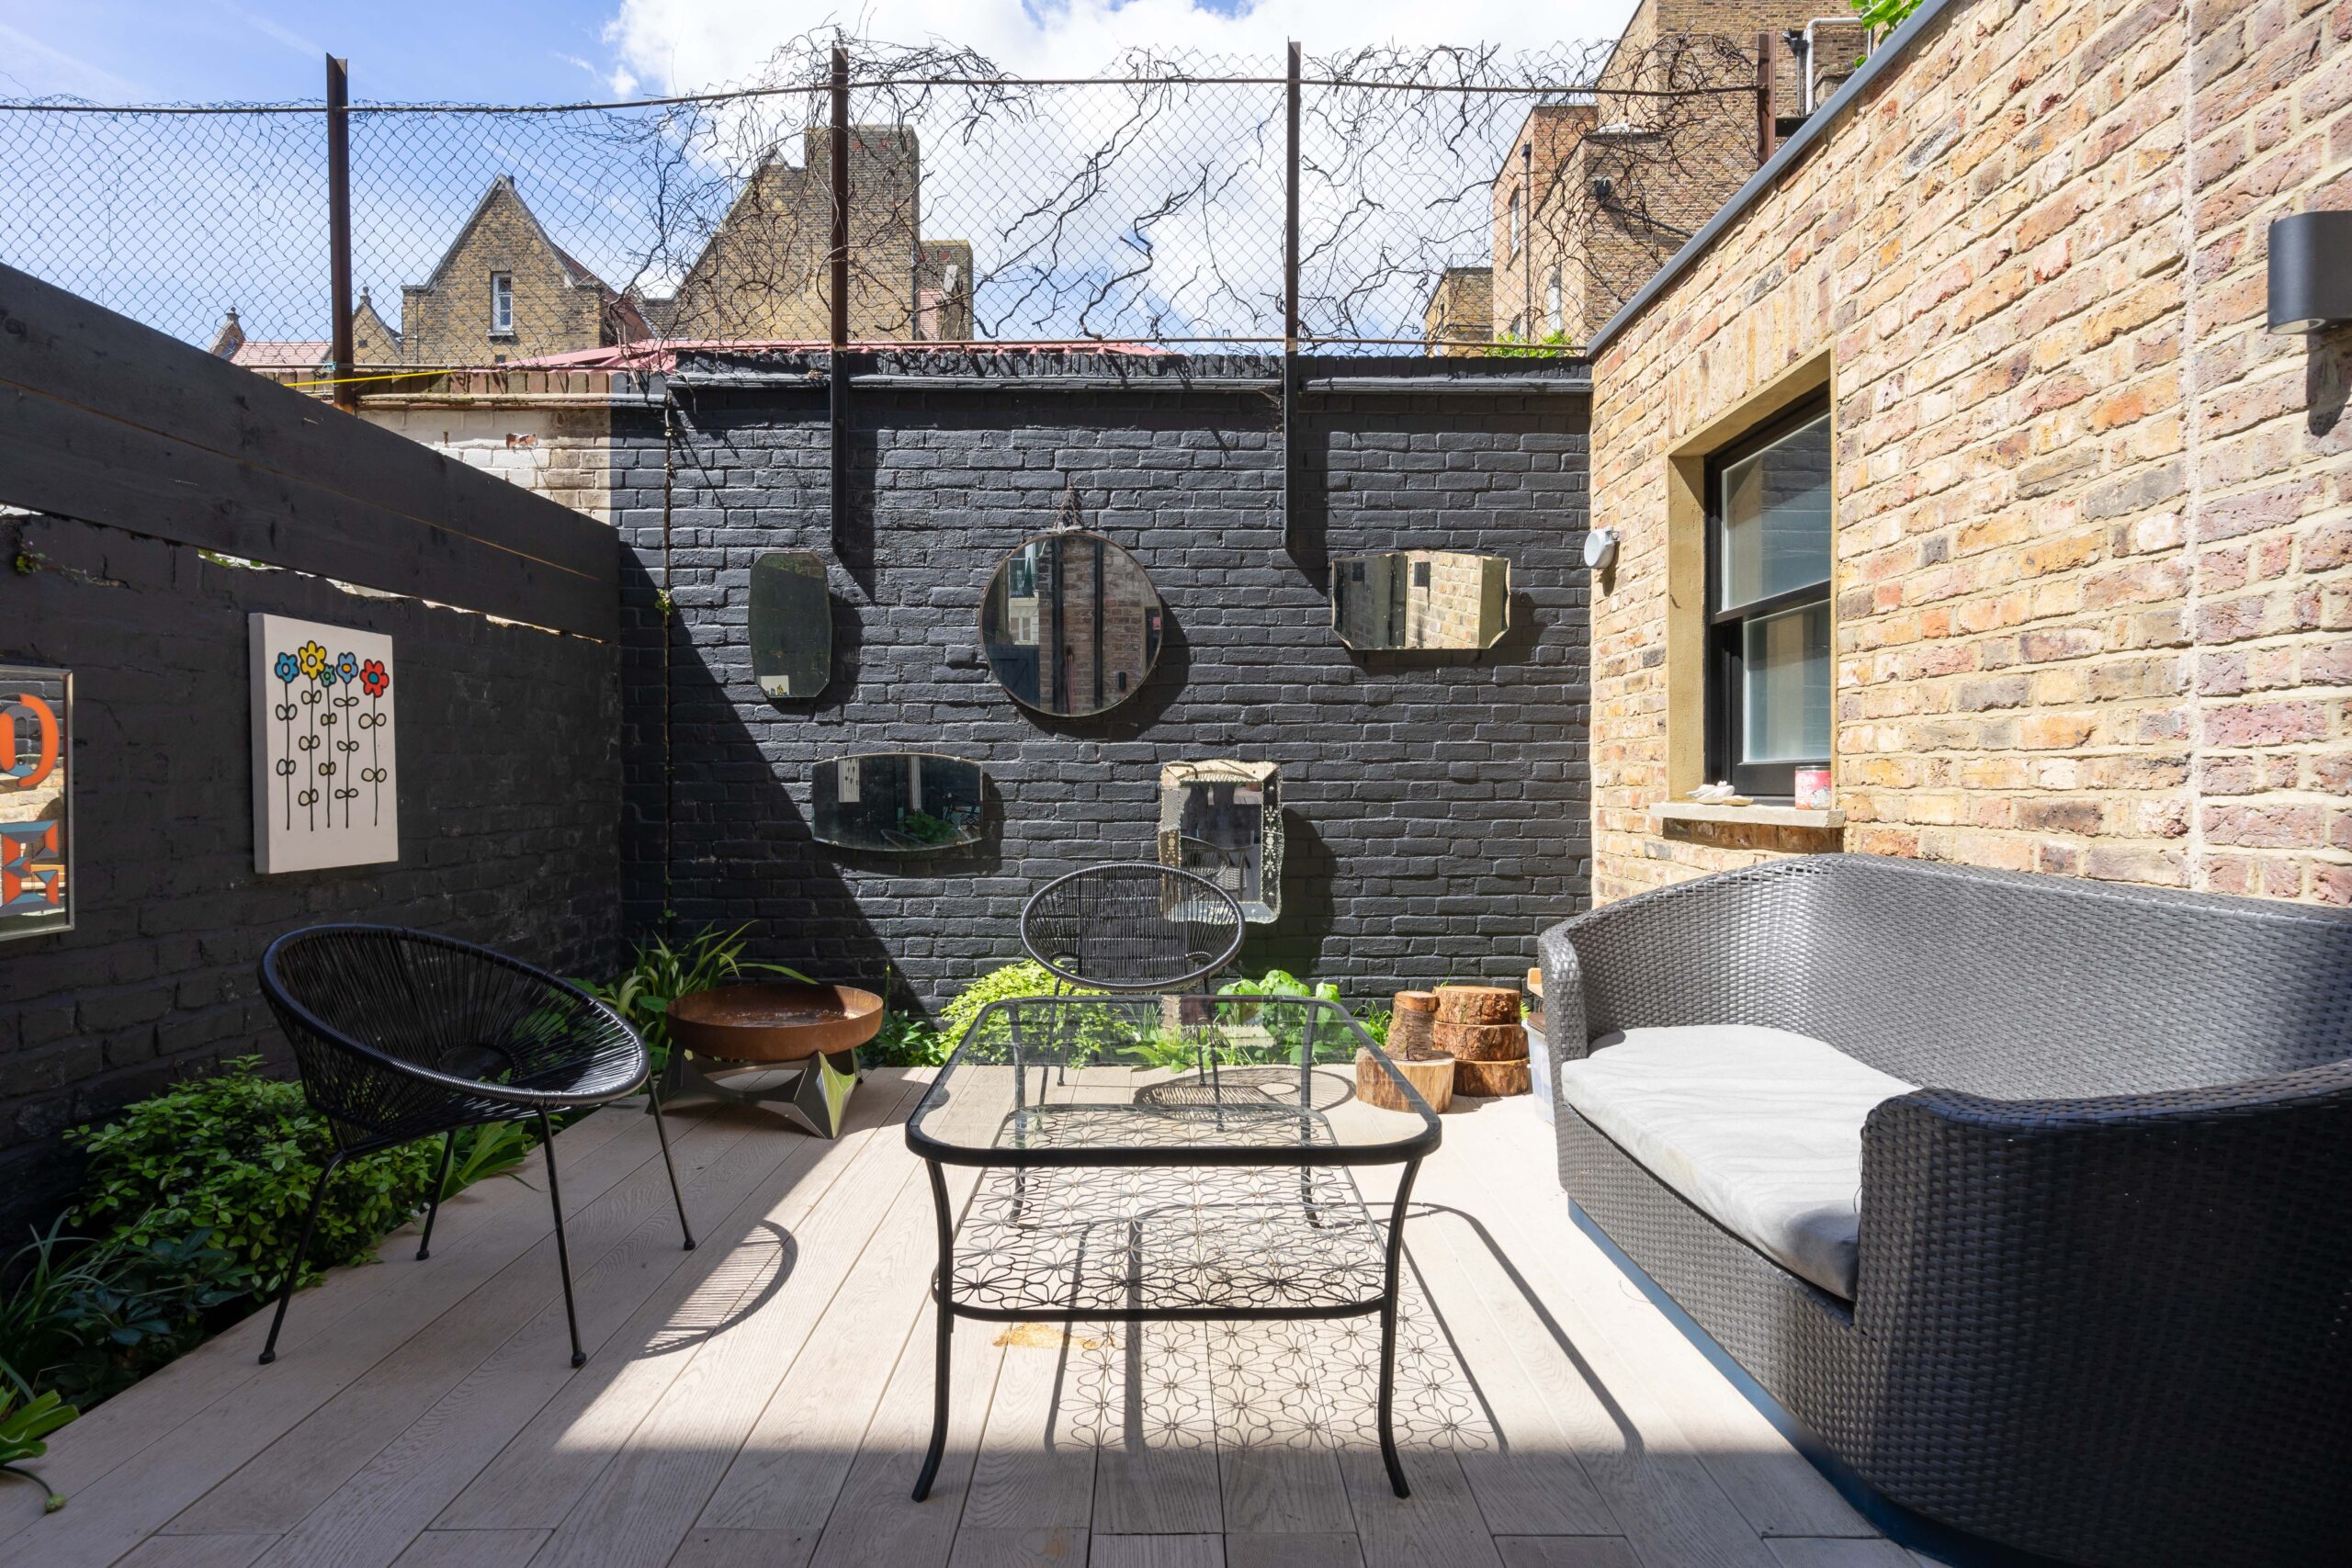 For Sale: Colville Road Notting Hill W11 patio garden with black brick wall